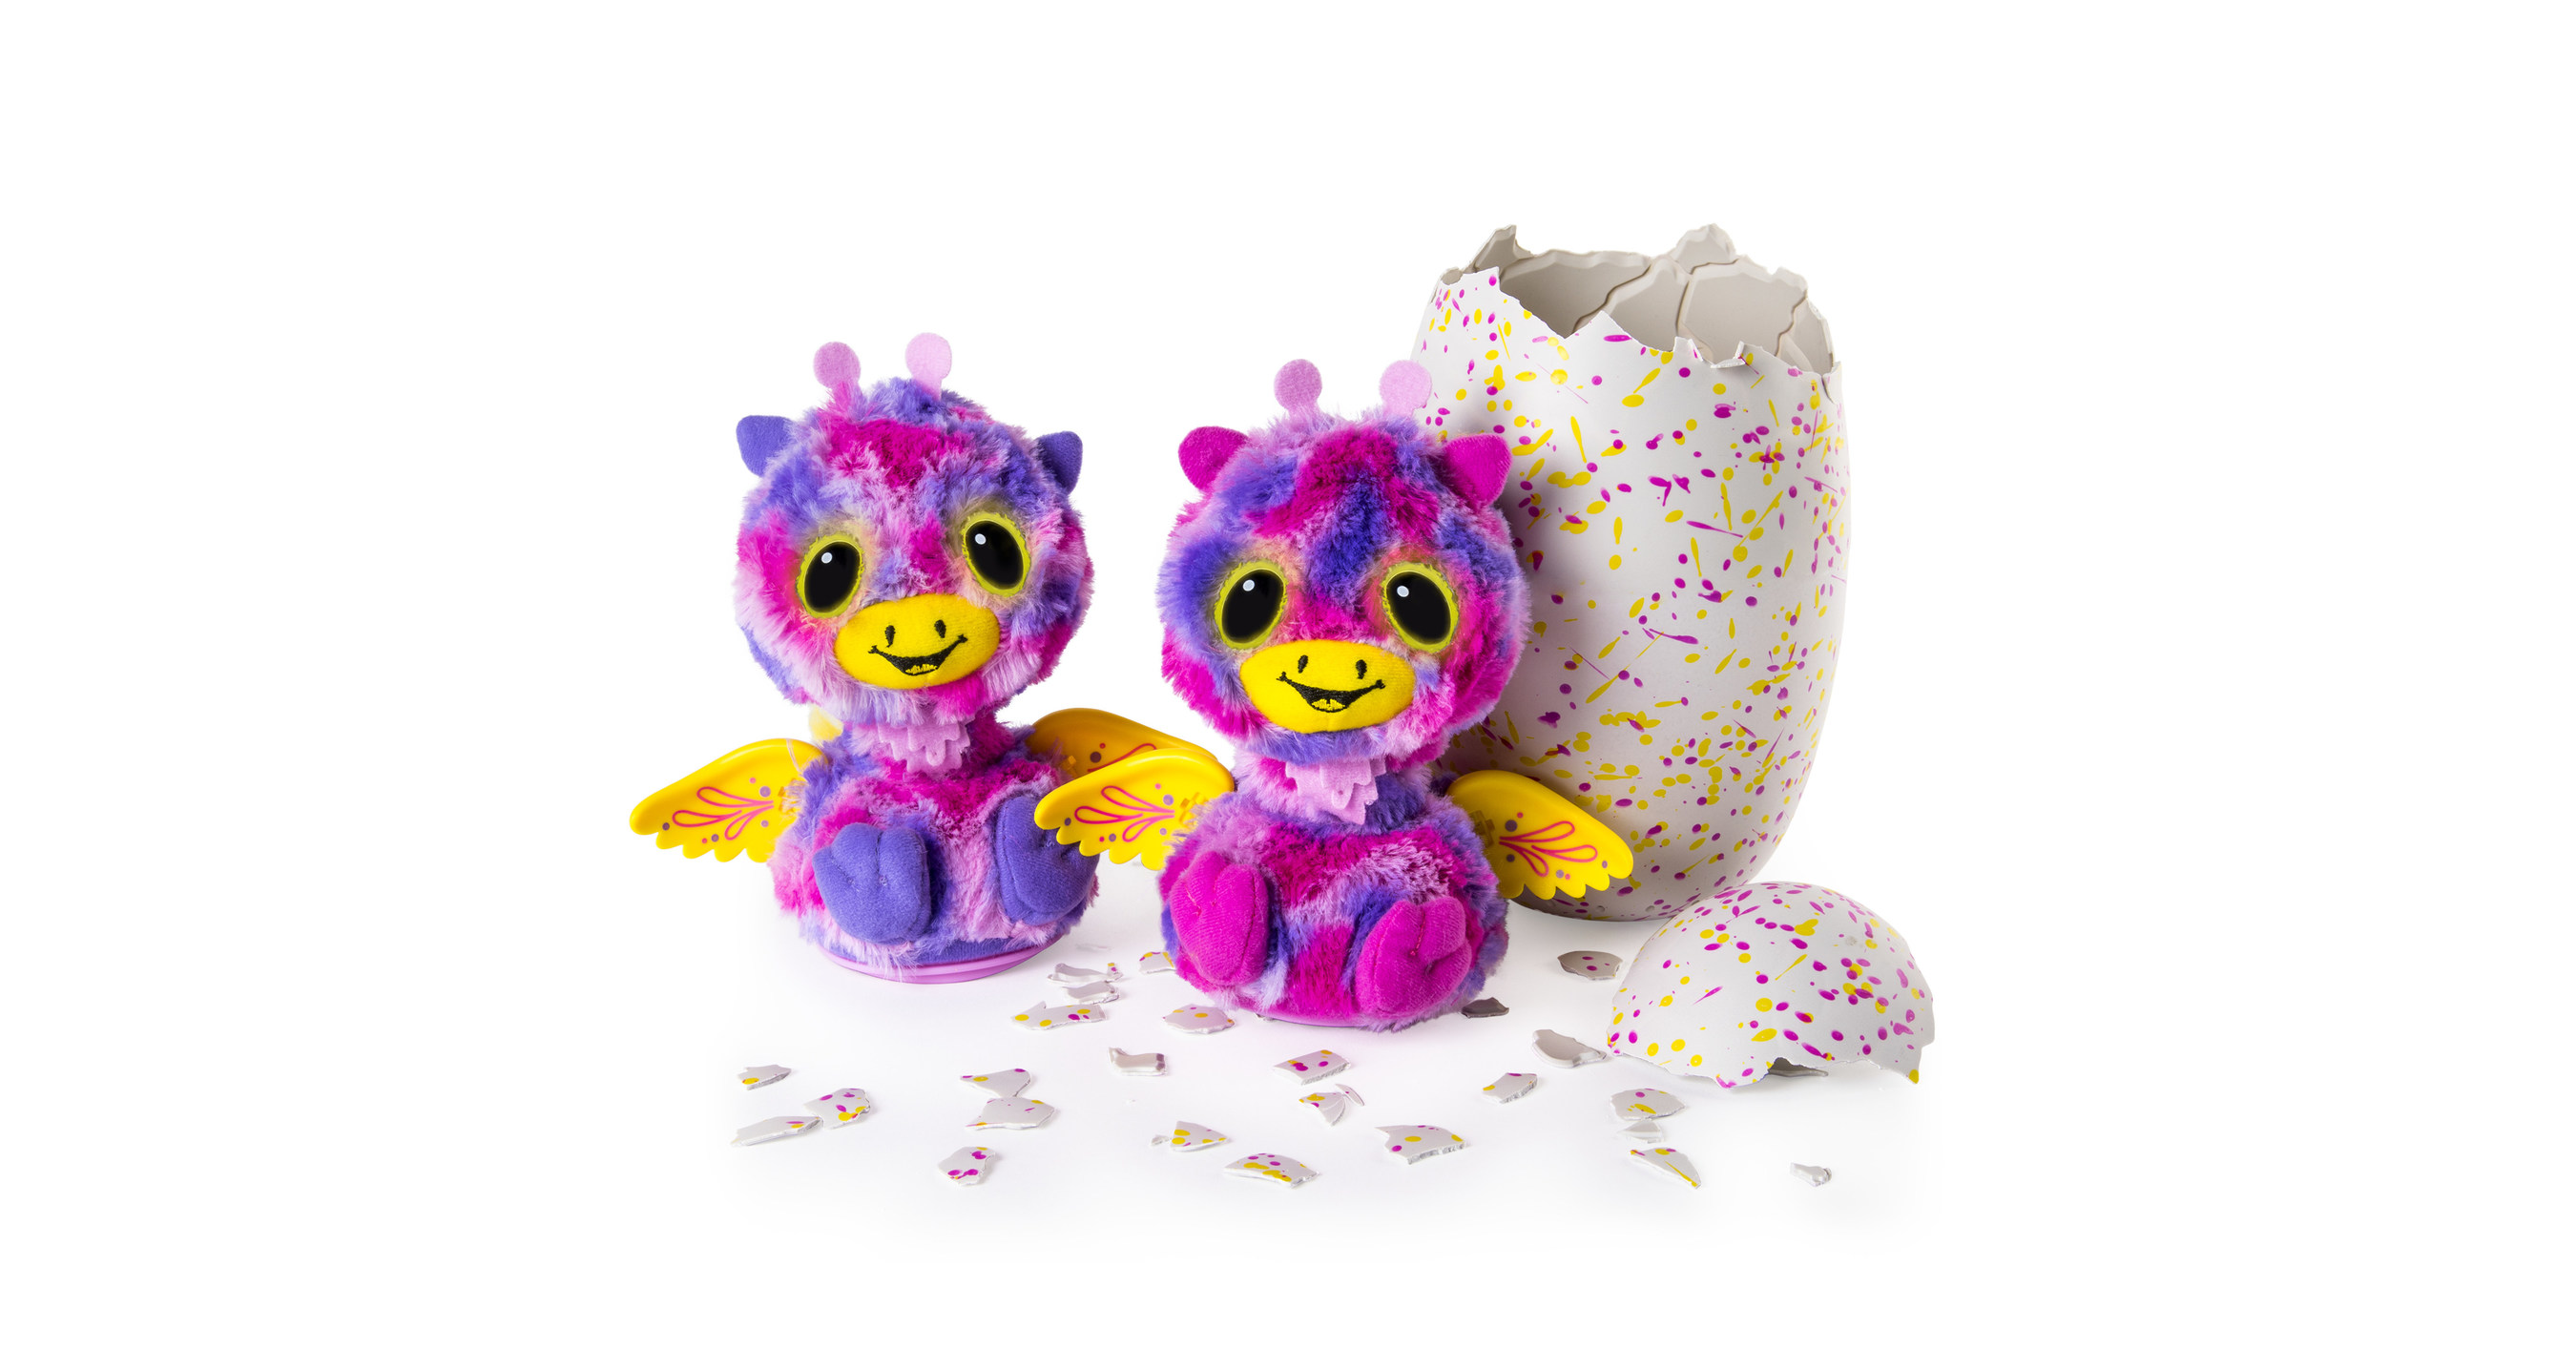 Spin Master launches first Hatchimals Week of Wow - Toy World Magazine, The business magazine with a passion for toysToy World Magazine